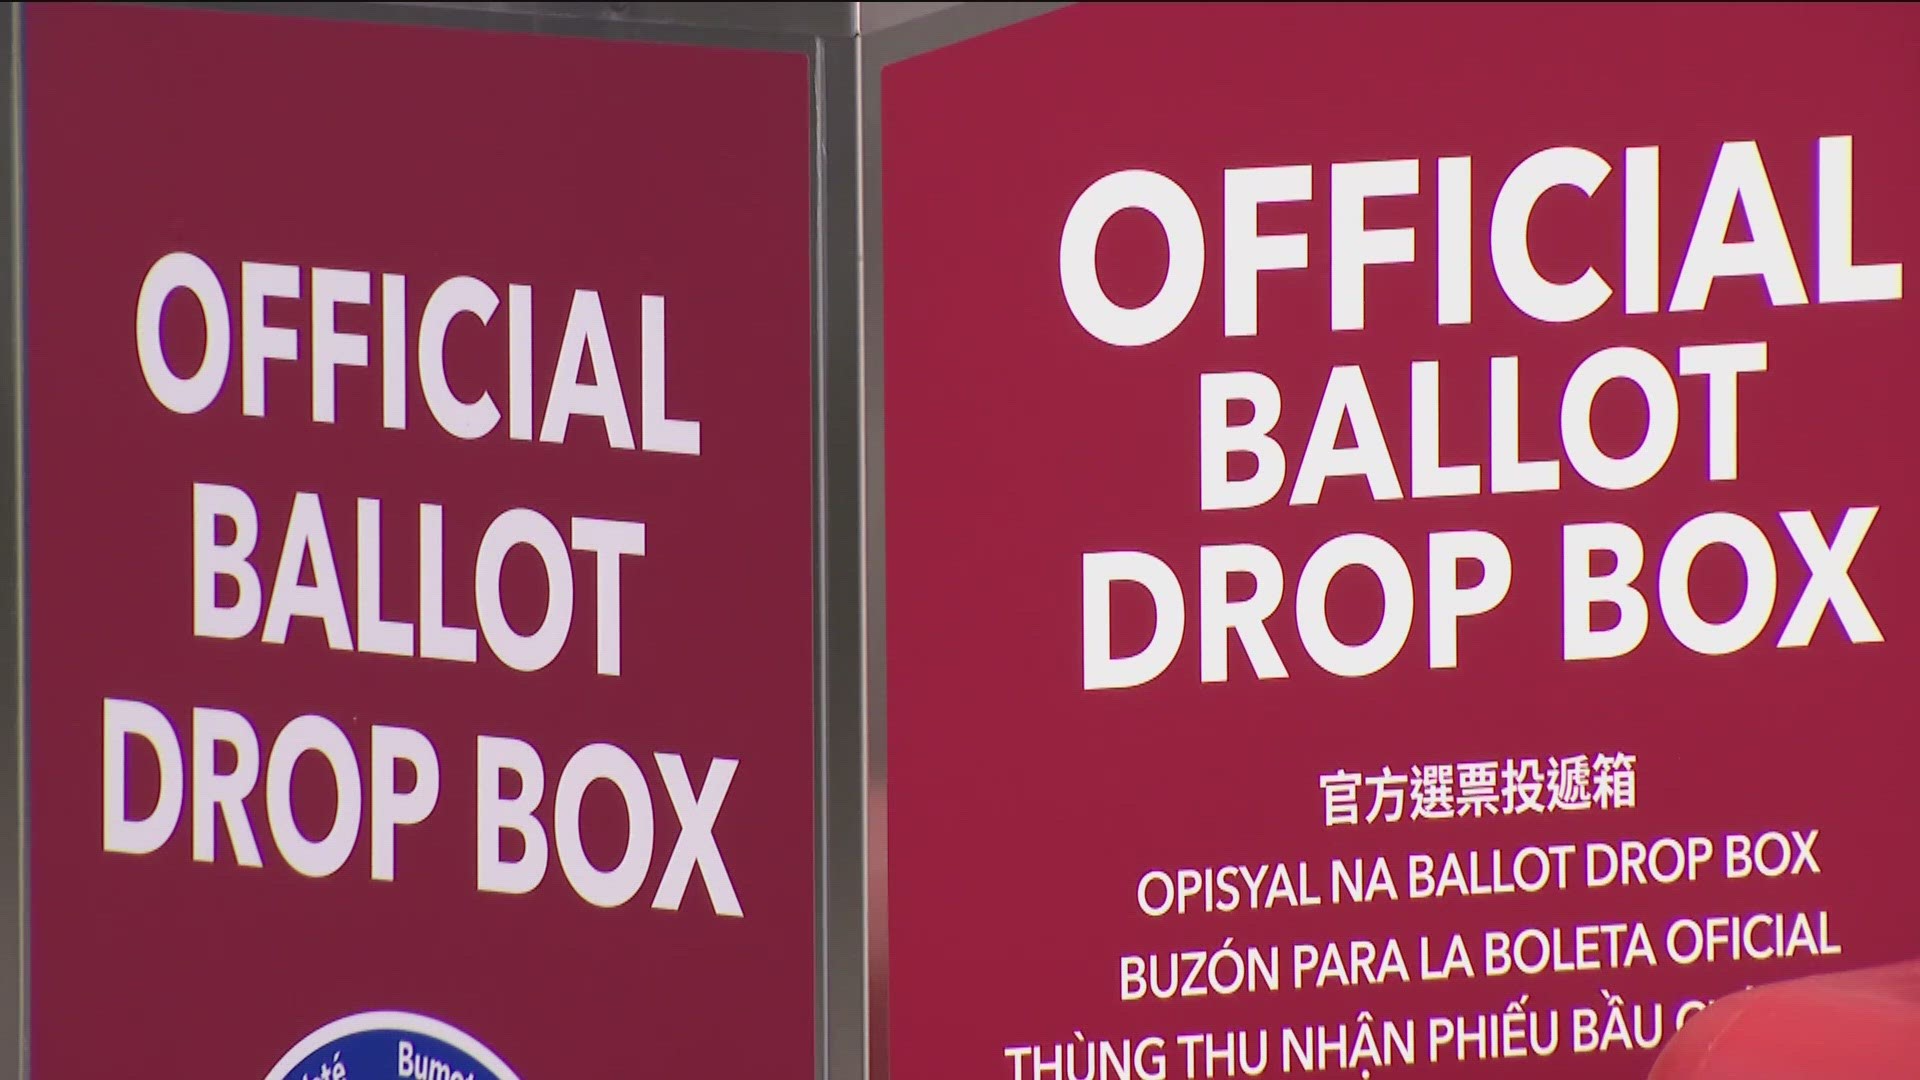 Over 390,000 mail-in ballots have been returned and are being processed as millions of voters across San Diego and California head to the polls on Super Tuesday.